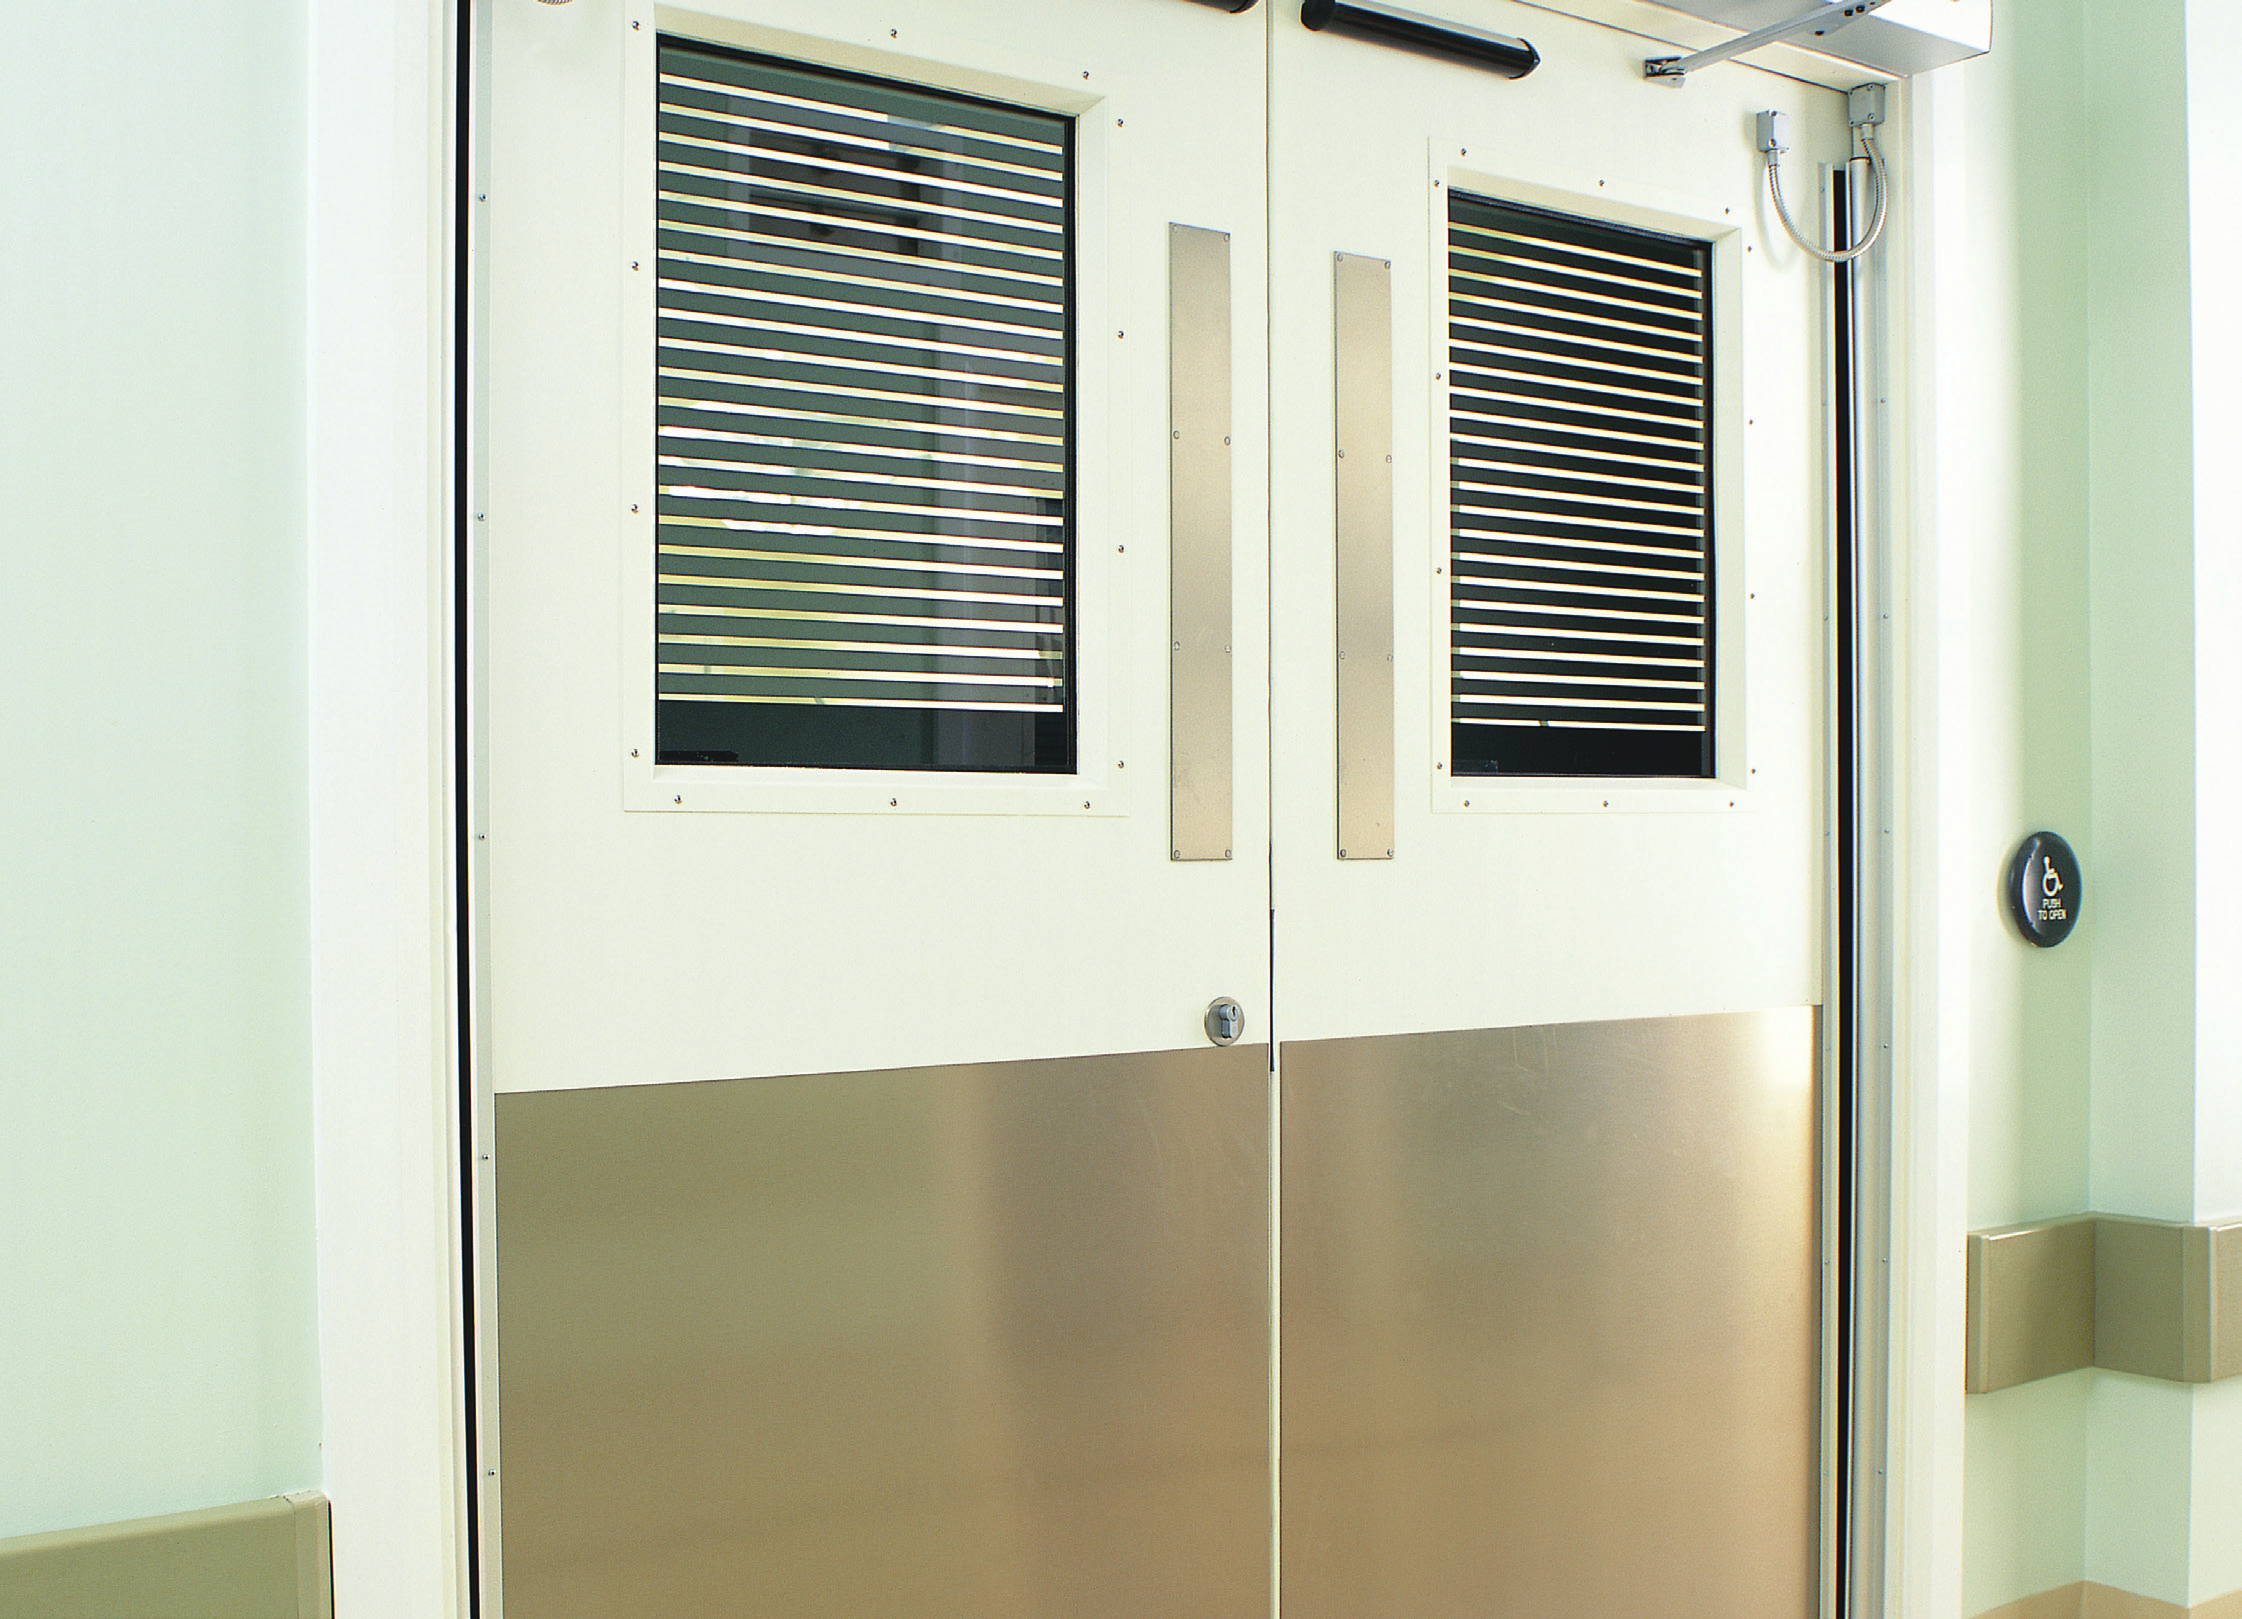 Powershield Cleanroom. Cleanroom Doors A Seamless Finish Powershield Cleanroom Doors are manufactured from high quality steel.